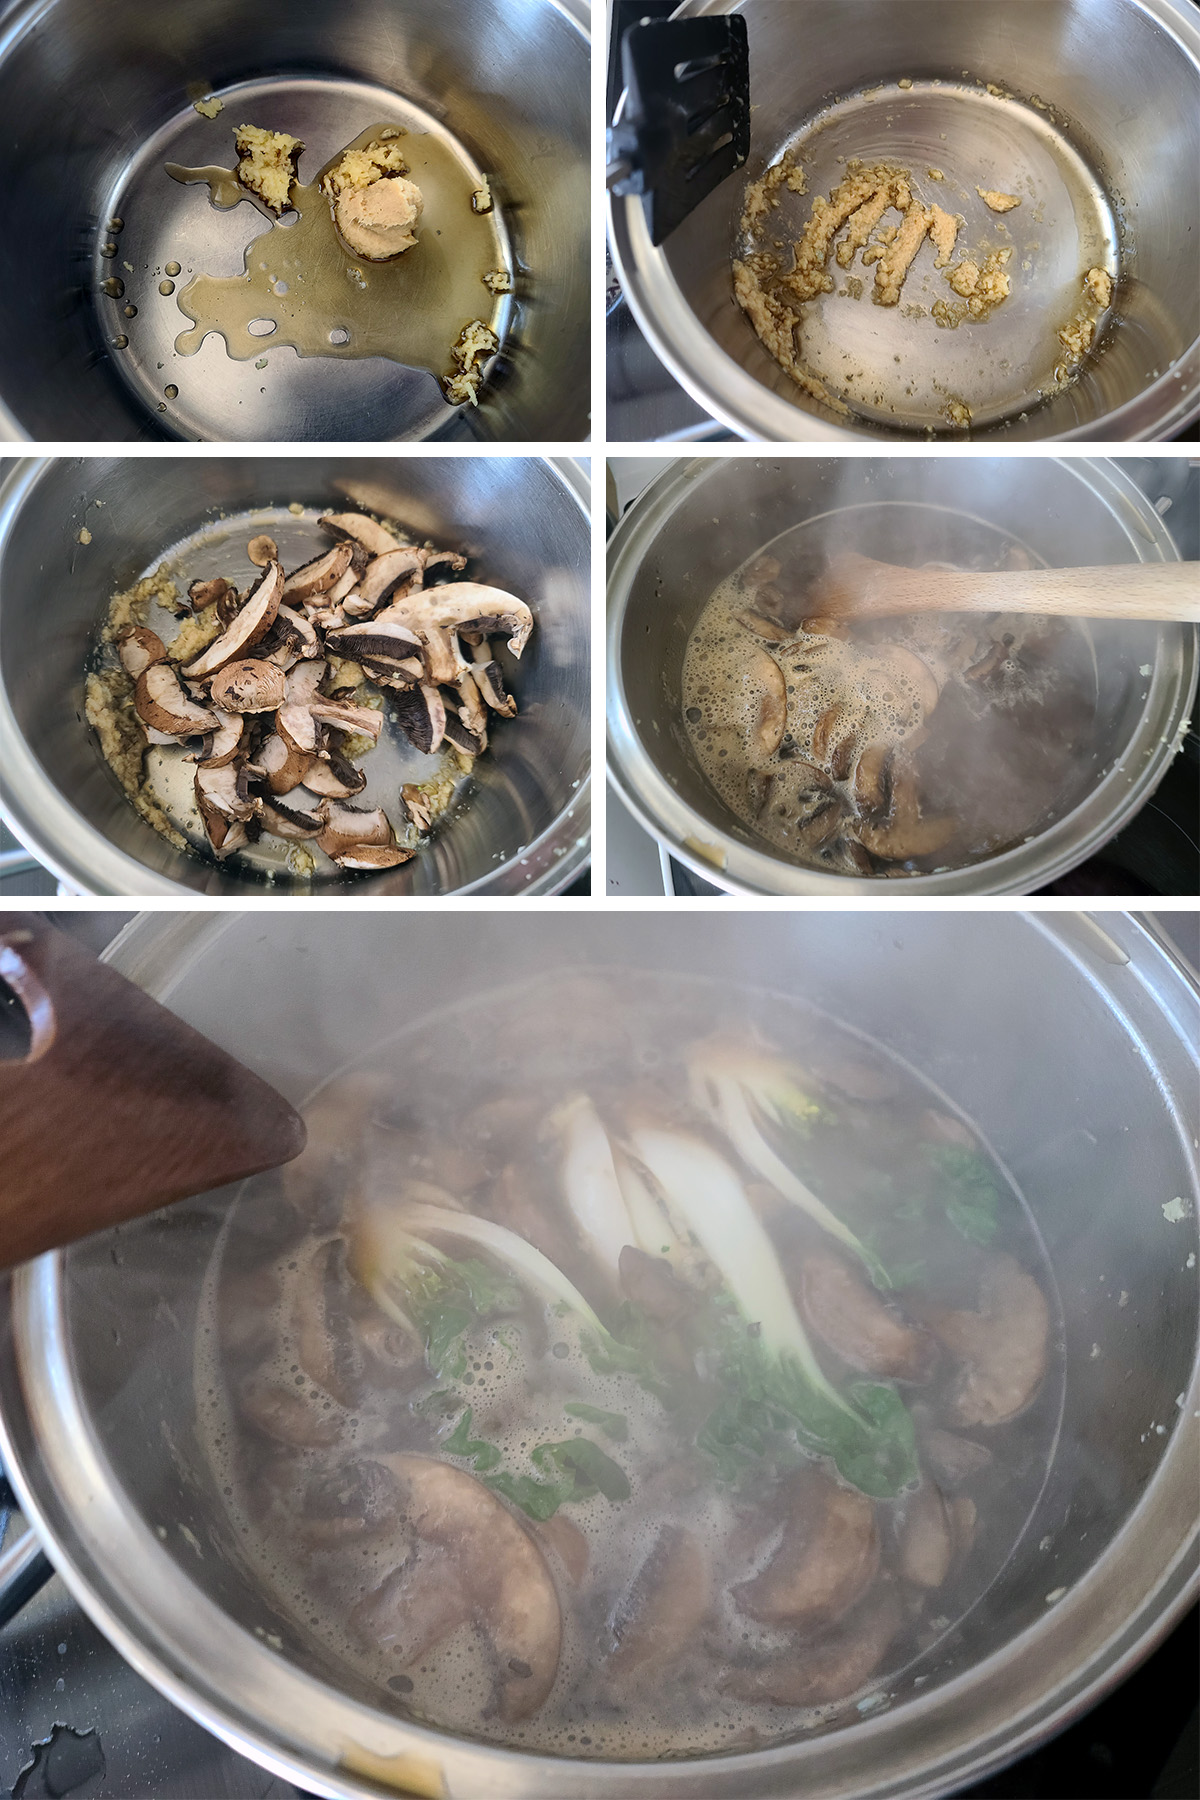 A 5 part image showing the broth being made.